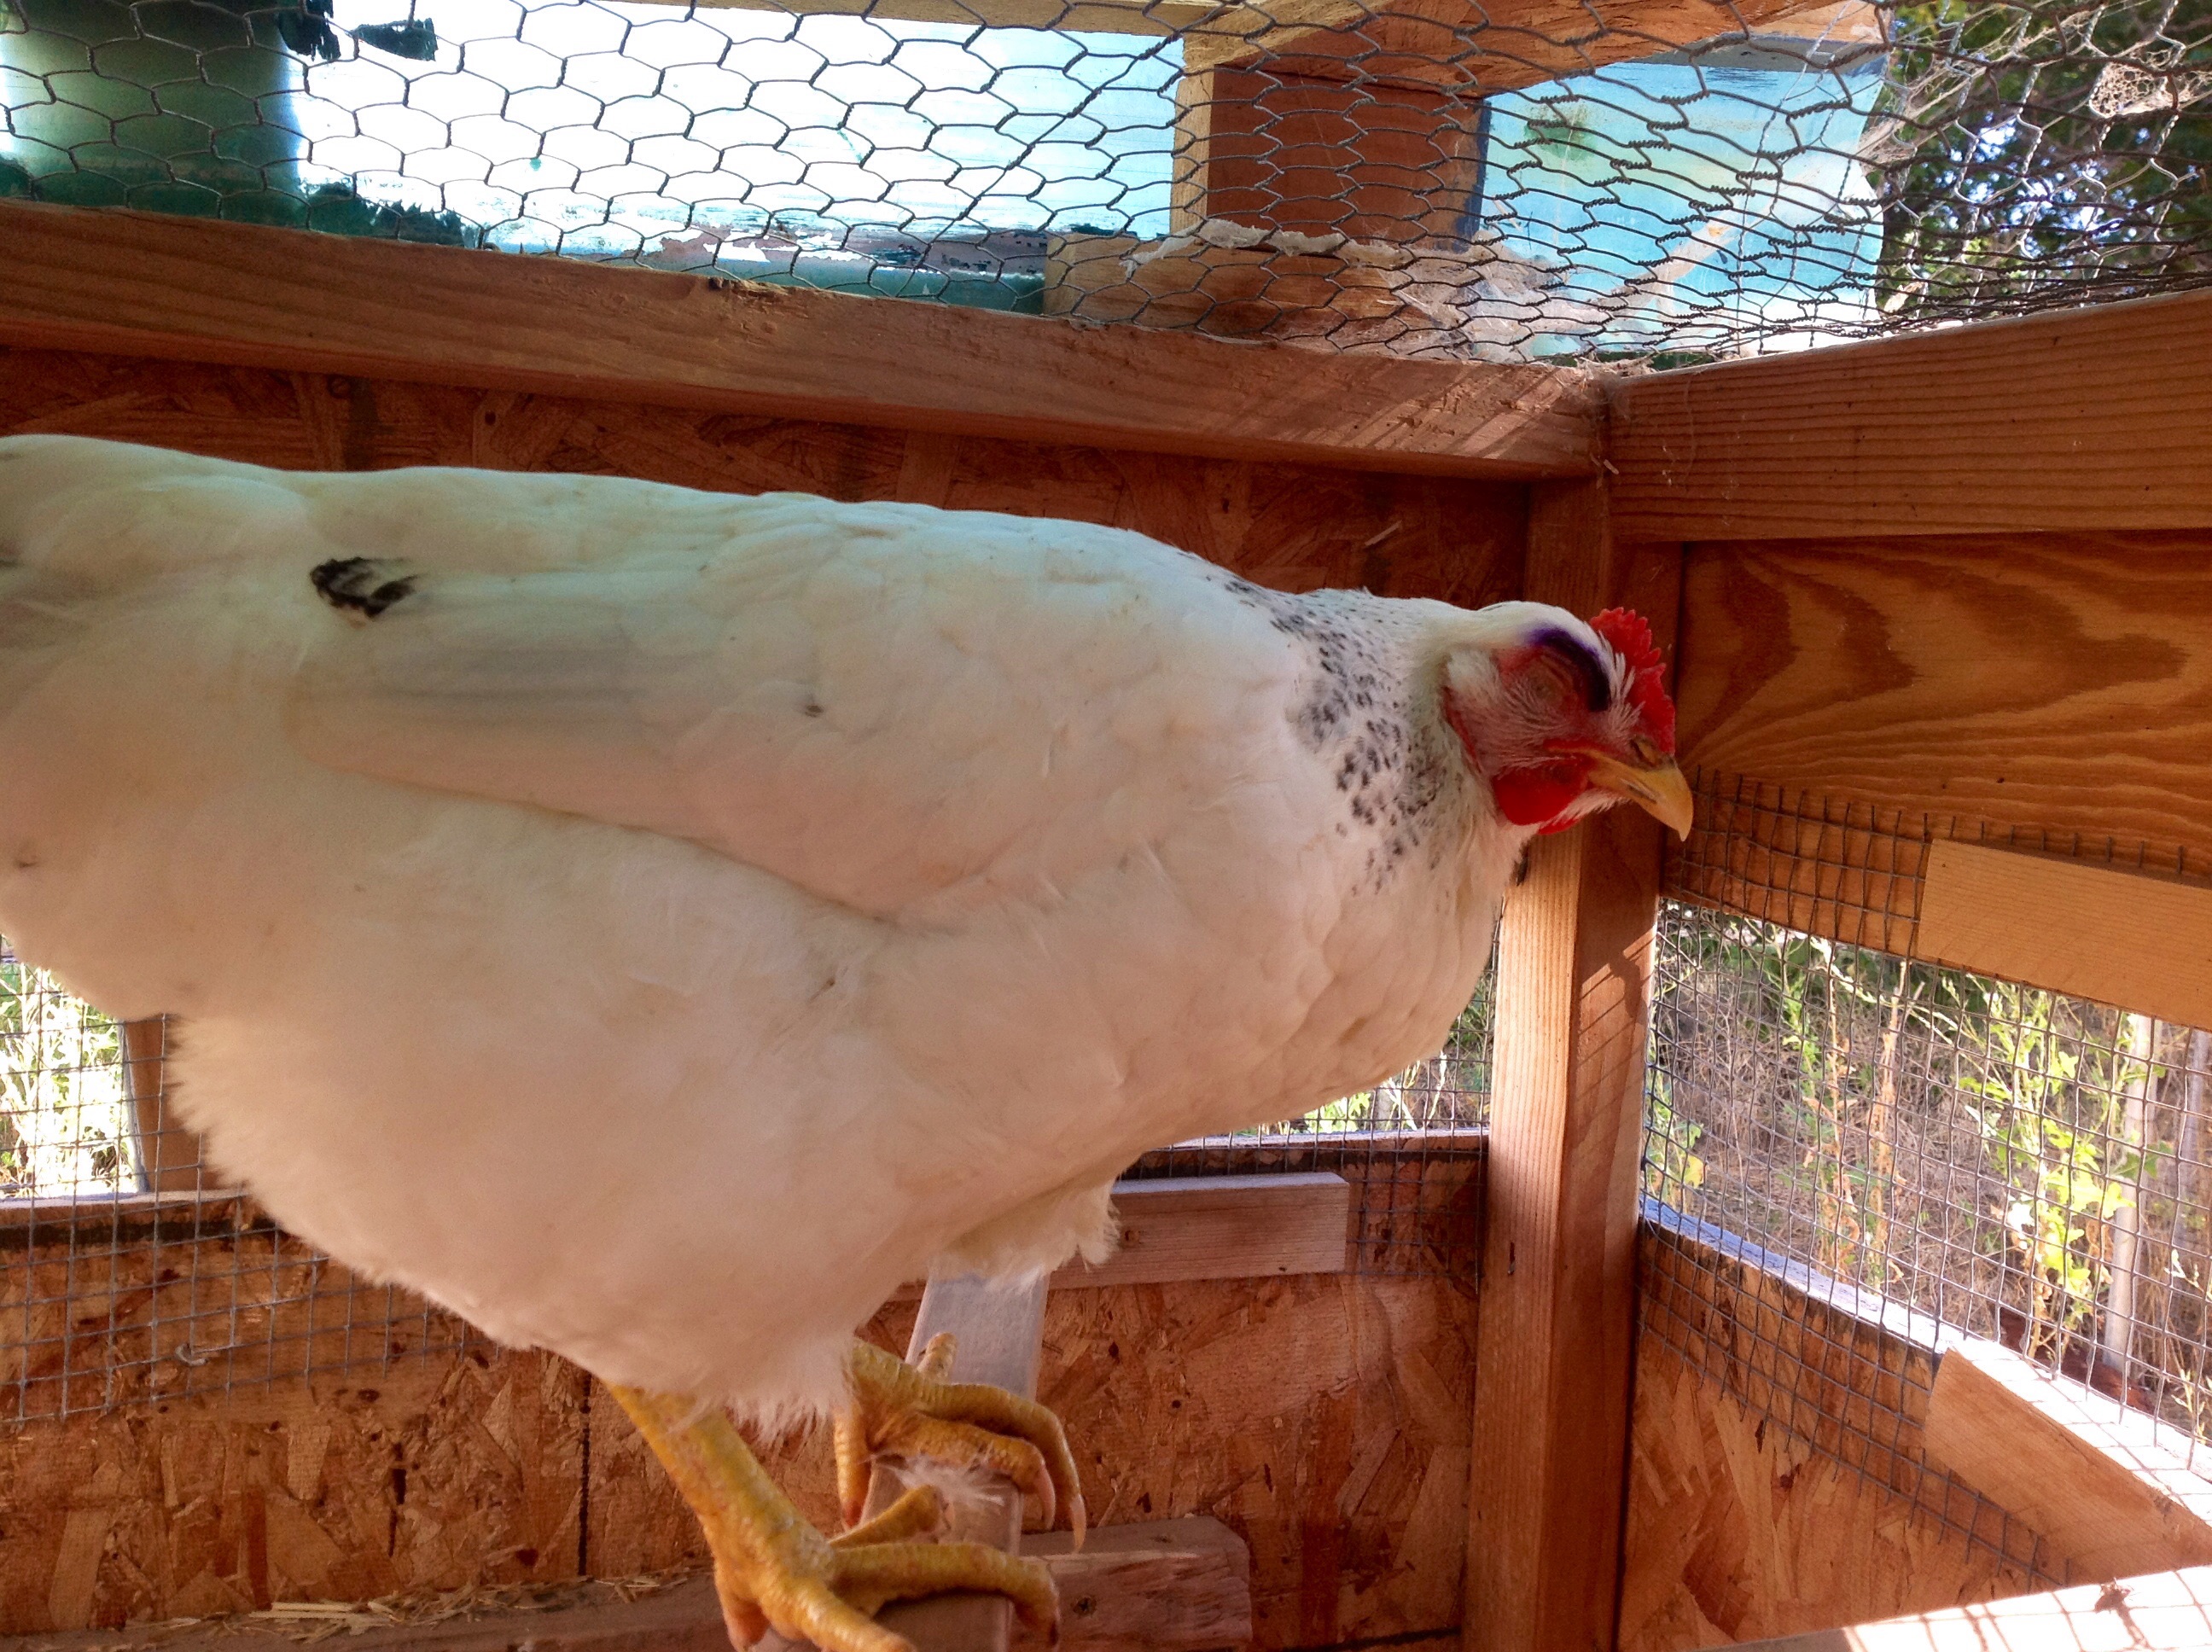 Left Eye - she was pecked above her right eye and is blind due to this.